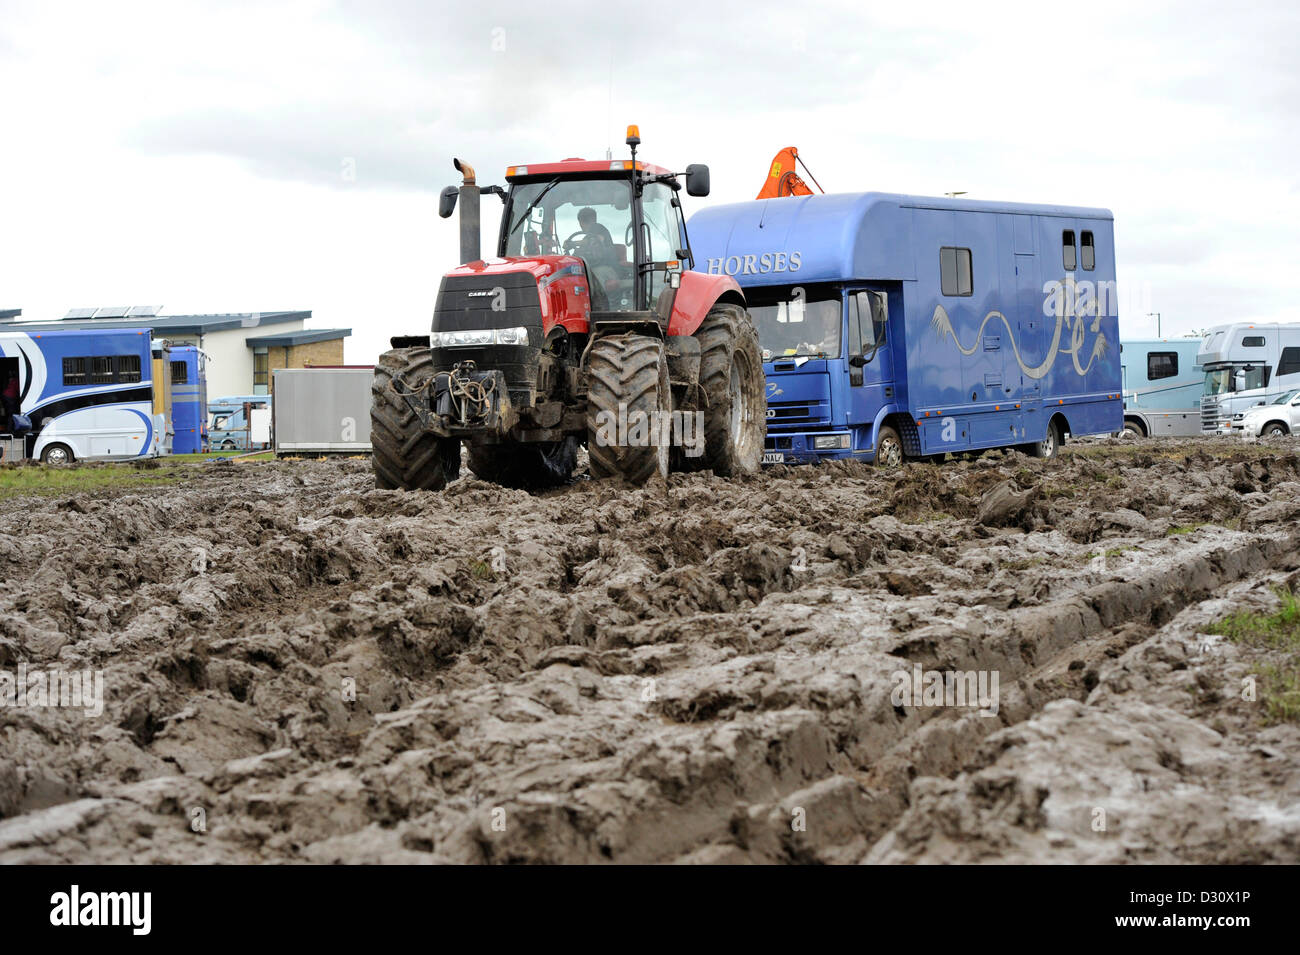 Tractor pulling horsebox out of the muddy car park at the Yorkshire Show 2012, which was cancelled due to bad weather. Stock Photo